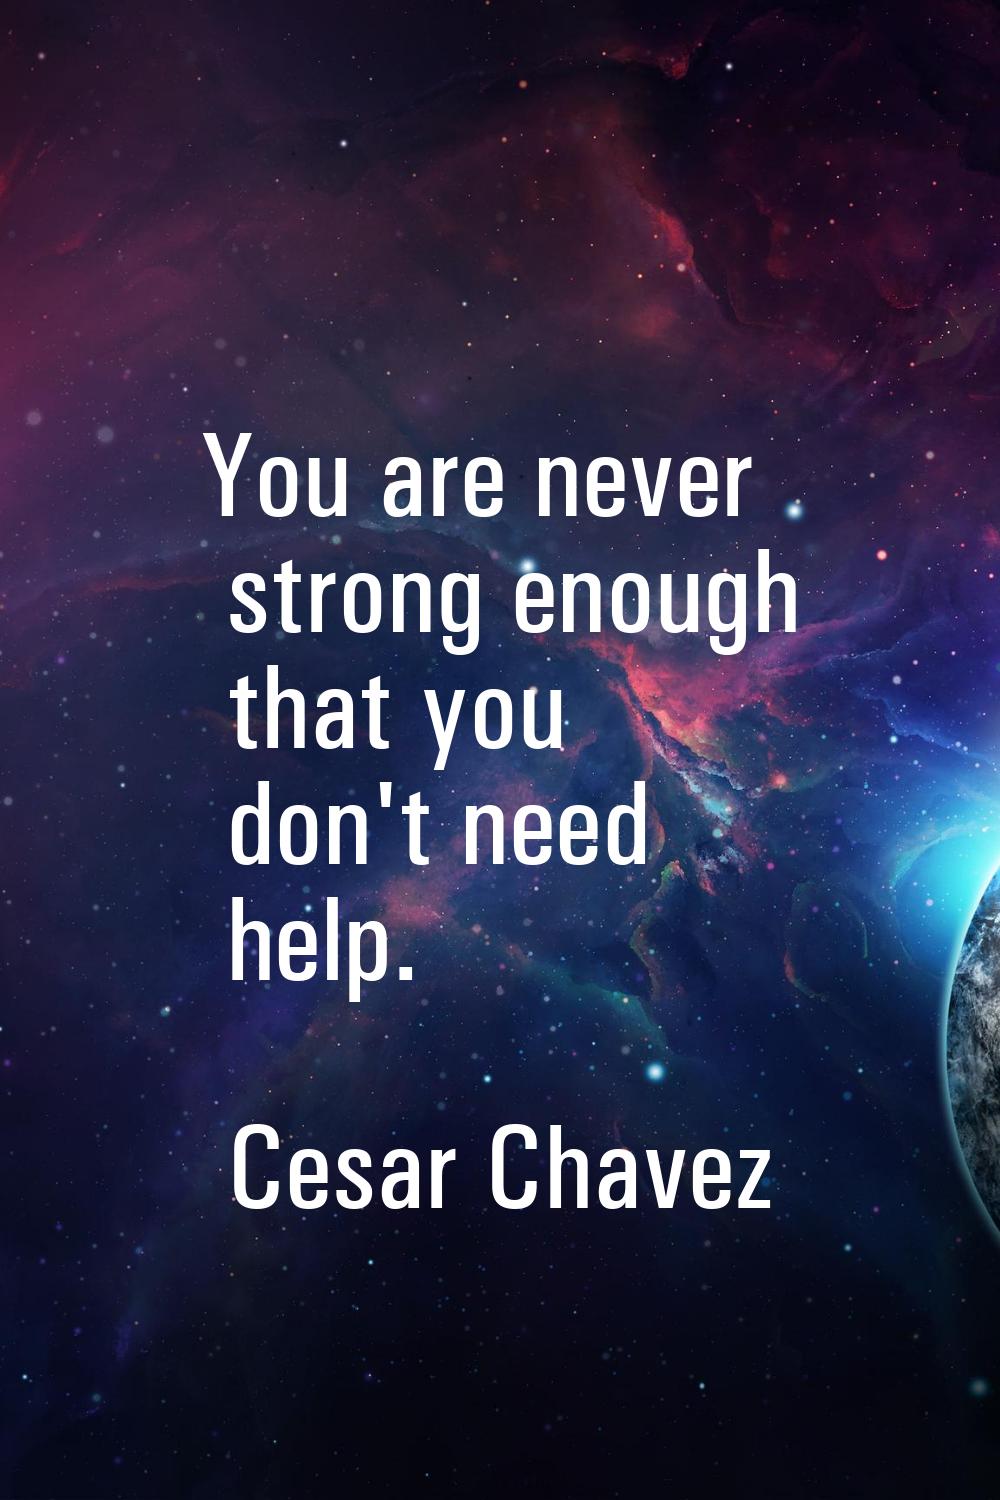 You are never strong enough that you don't need help.